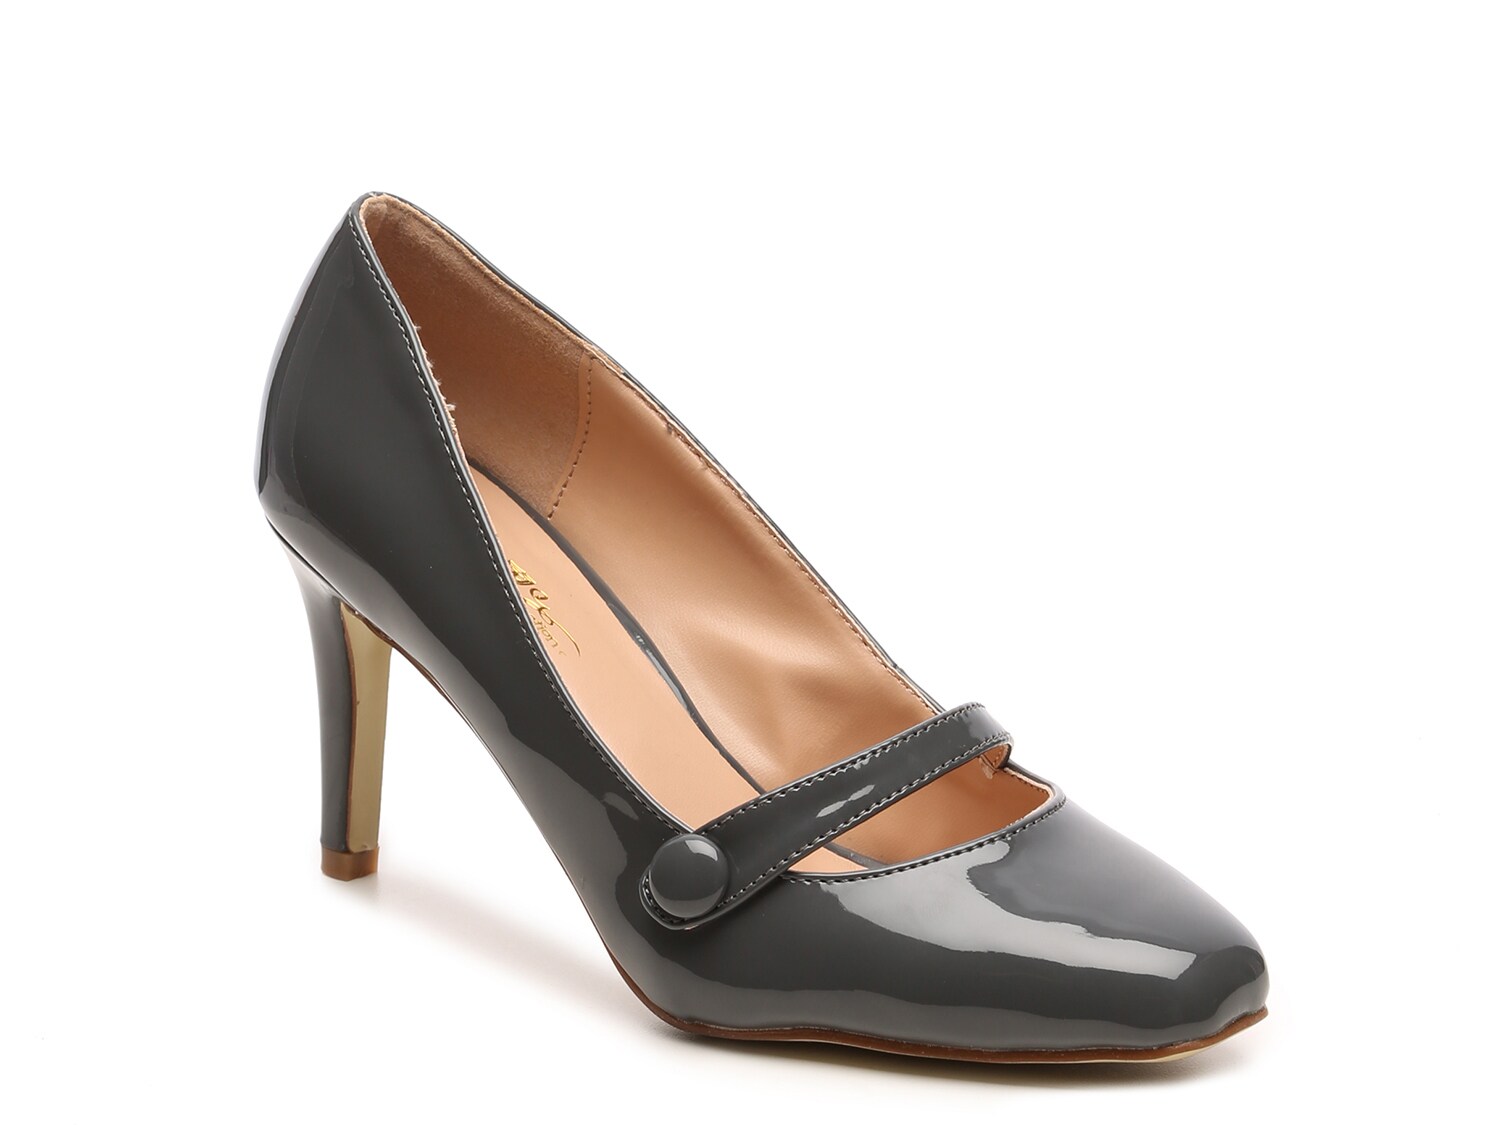 Journee Collection Devi Pump - Free Shipping | DSW